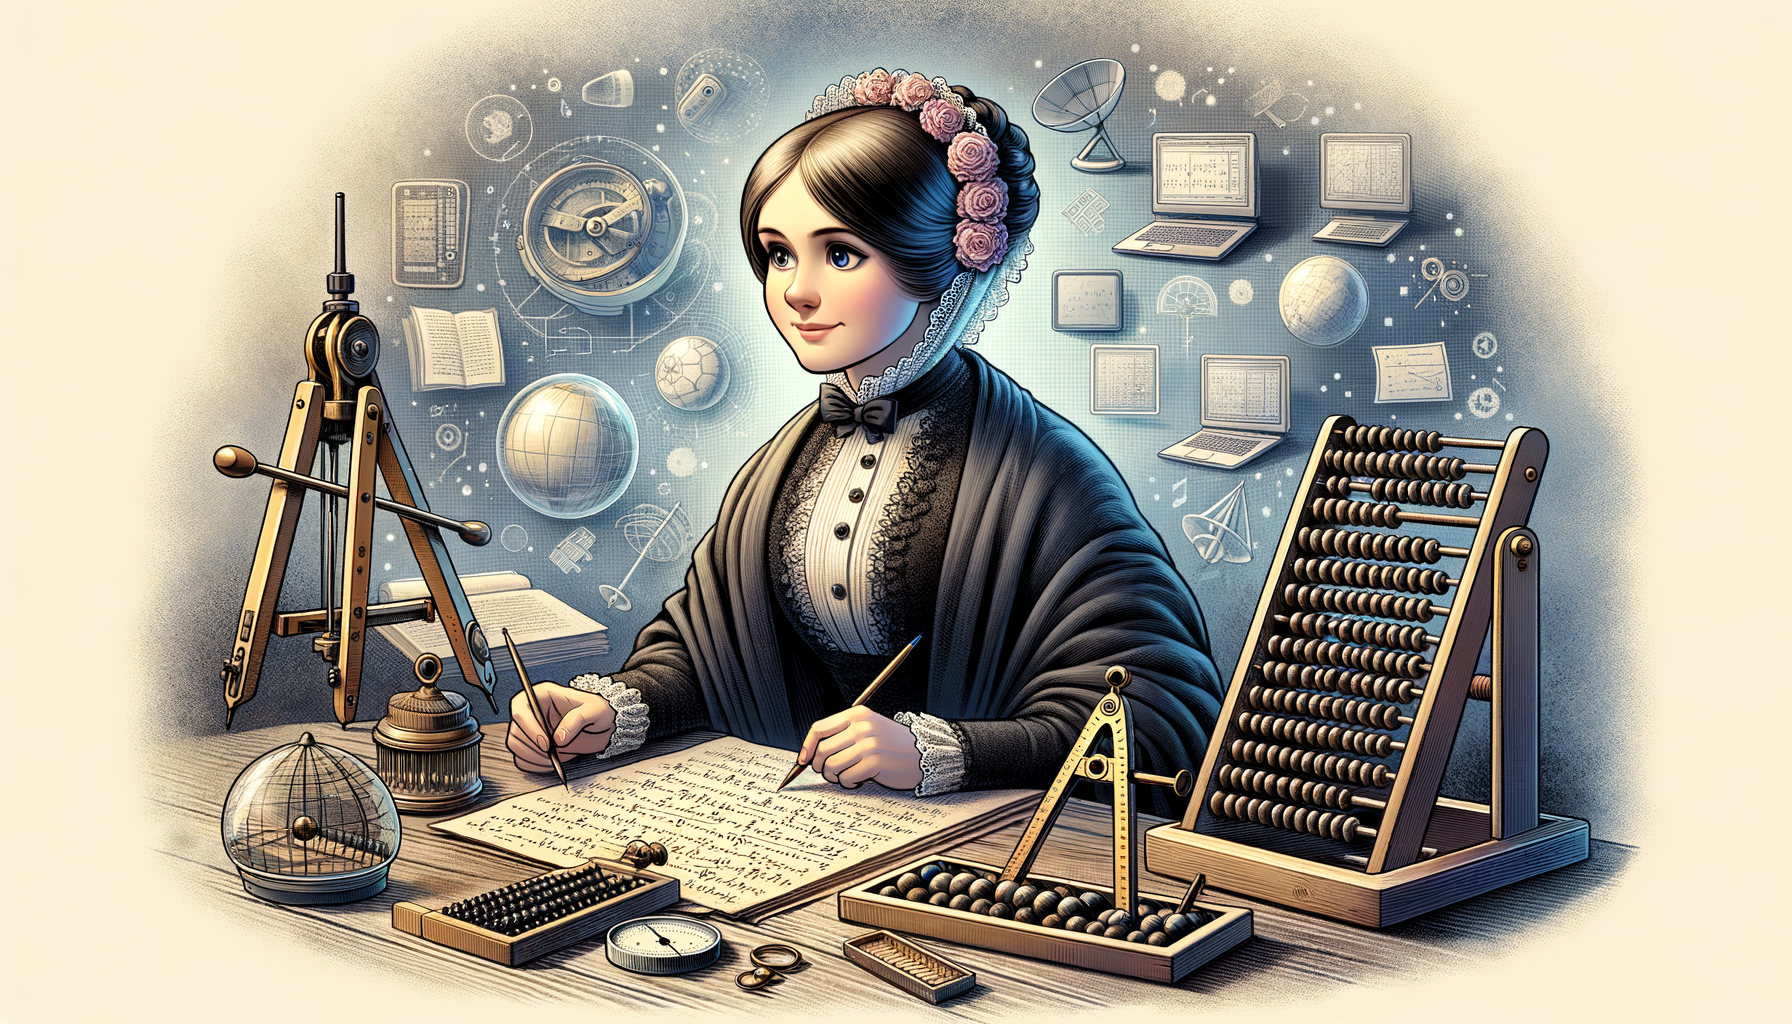 Design Software History: Ada Lovelace: The Pioneering Mathematician Who Foretold Modern Computing